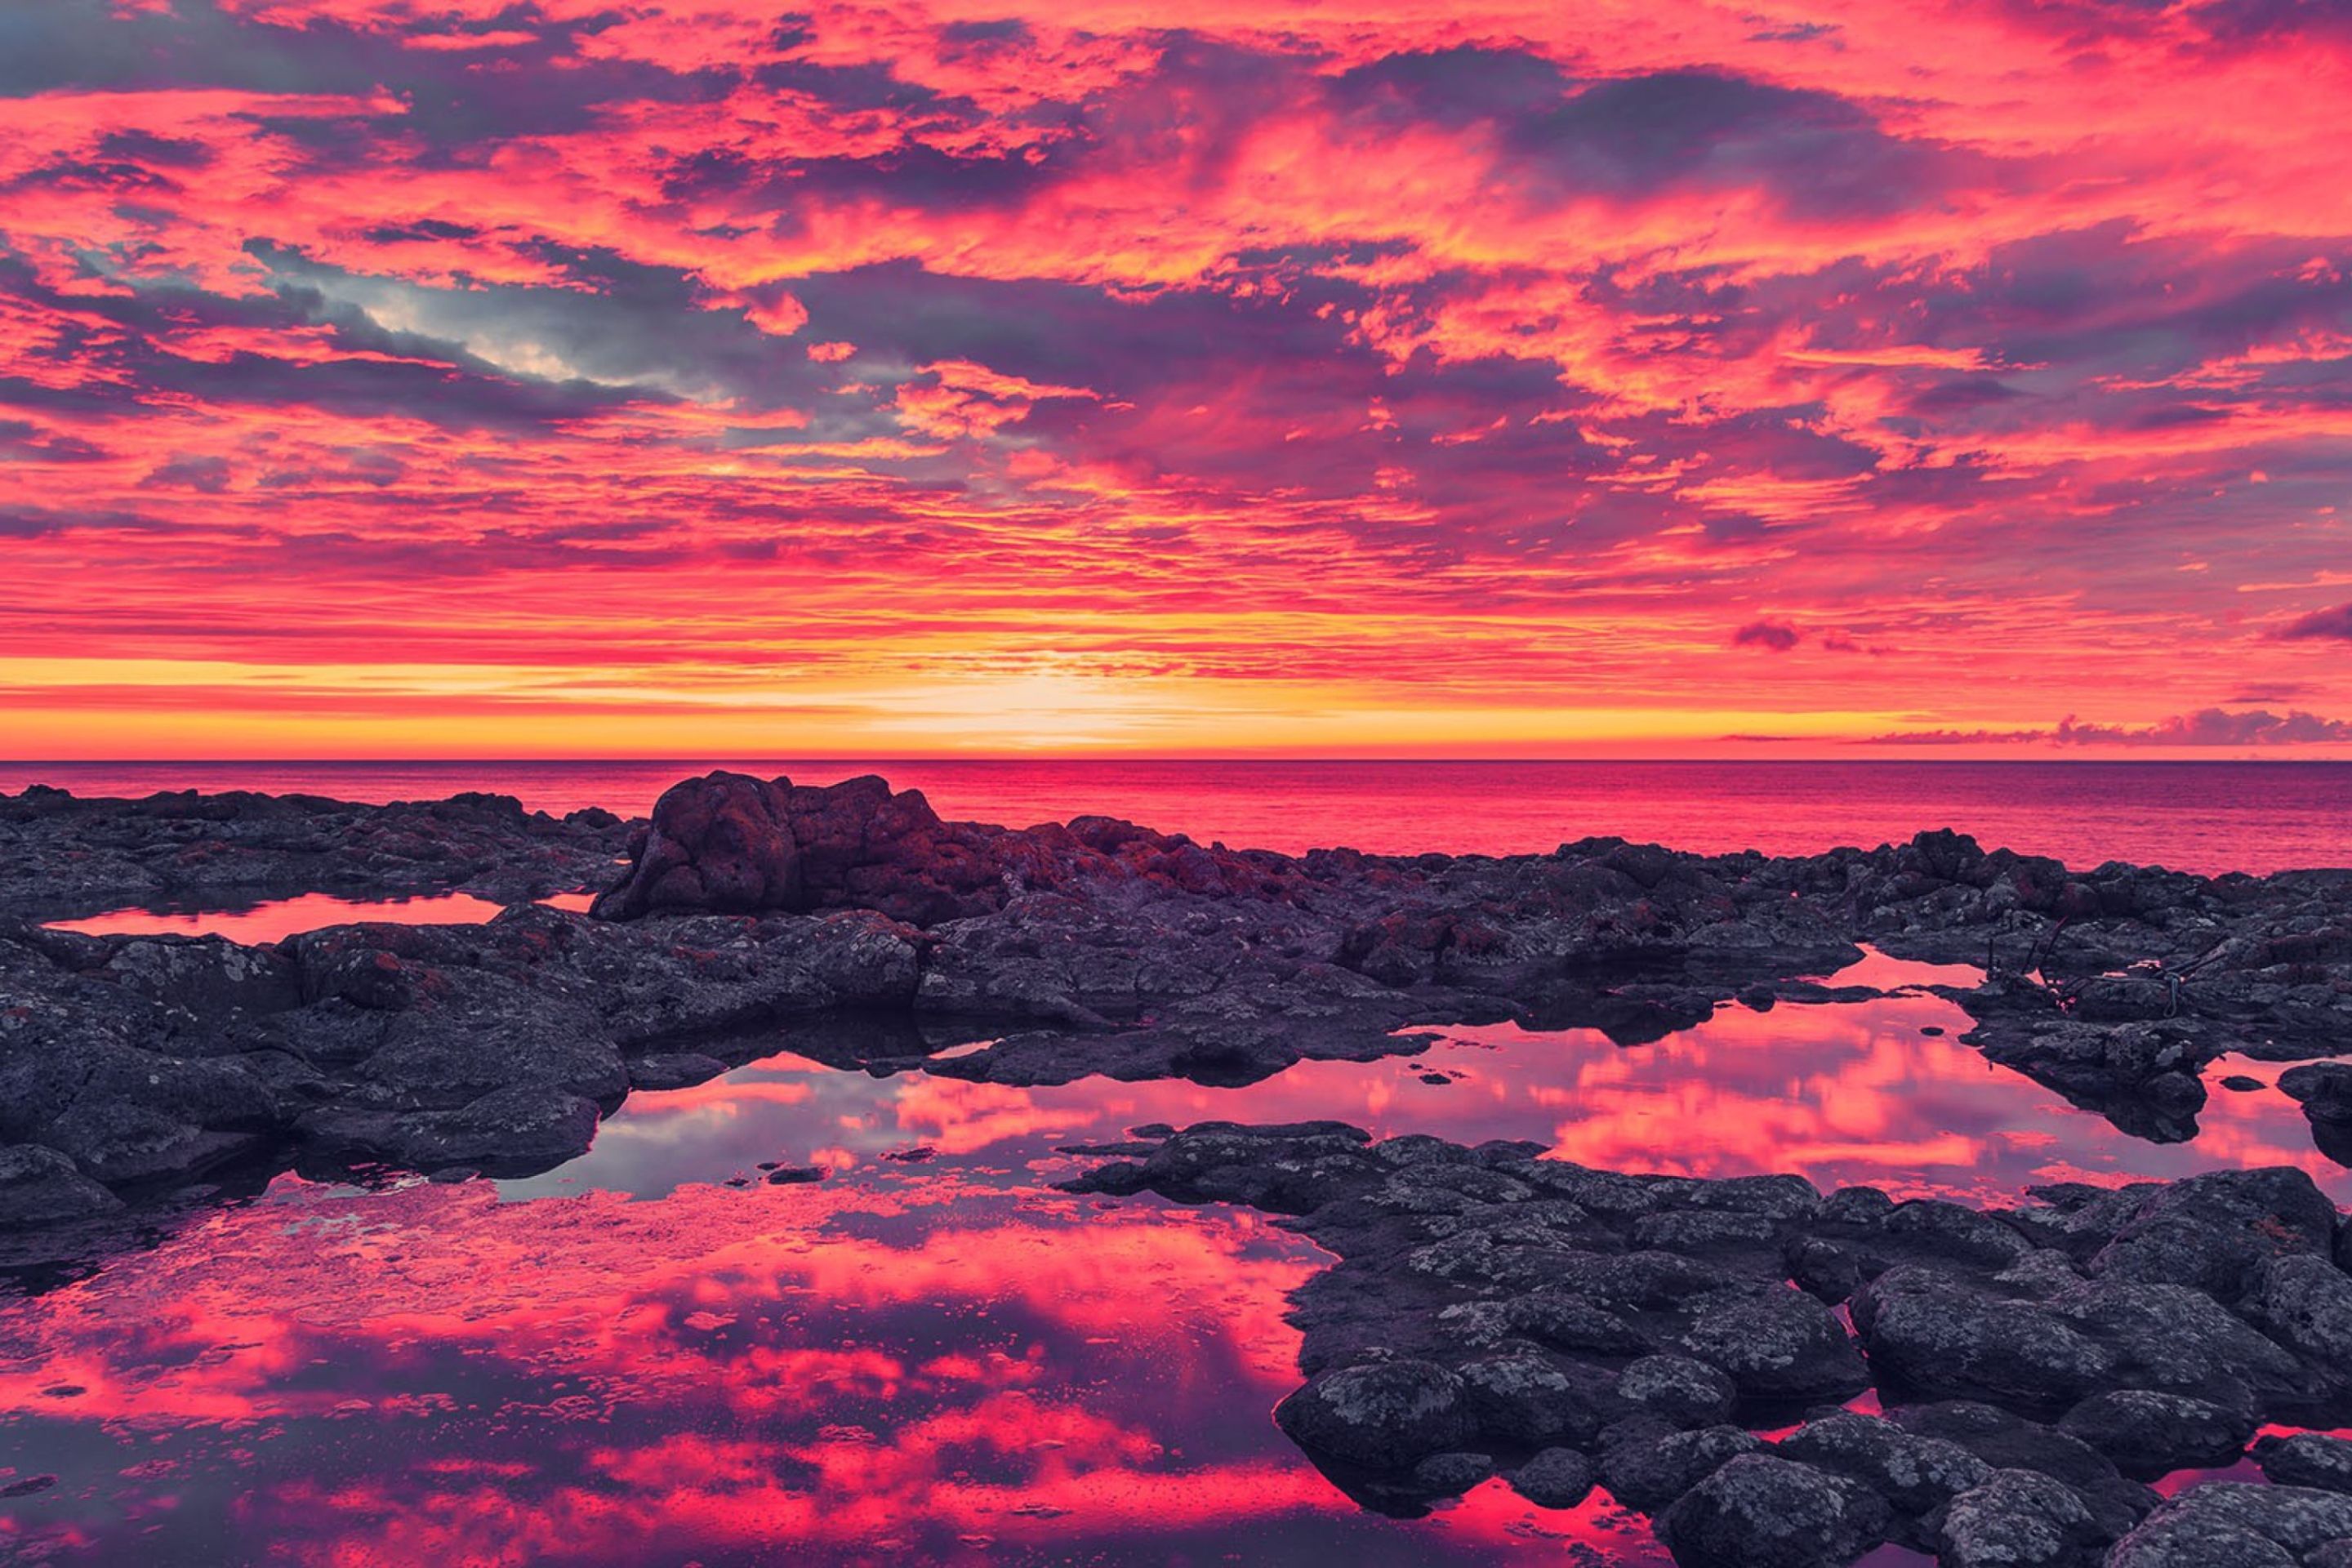 A sunset over the ocean with rocks in it - Sunset